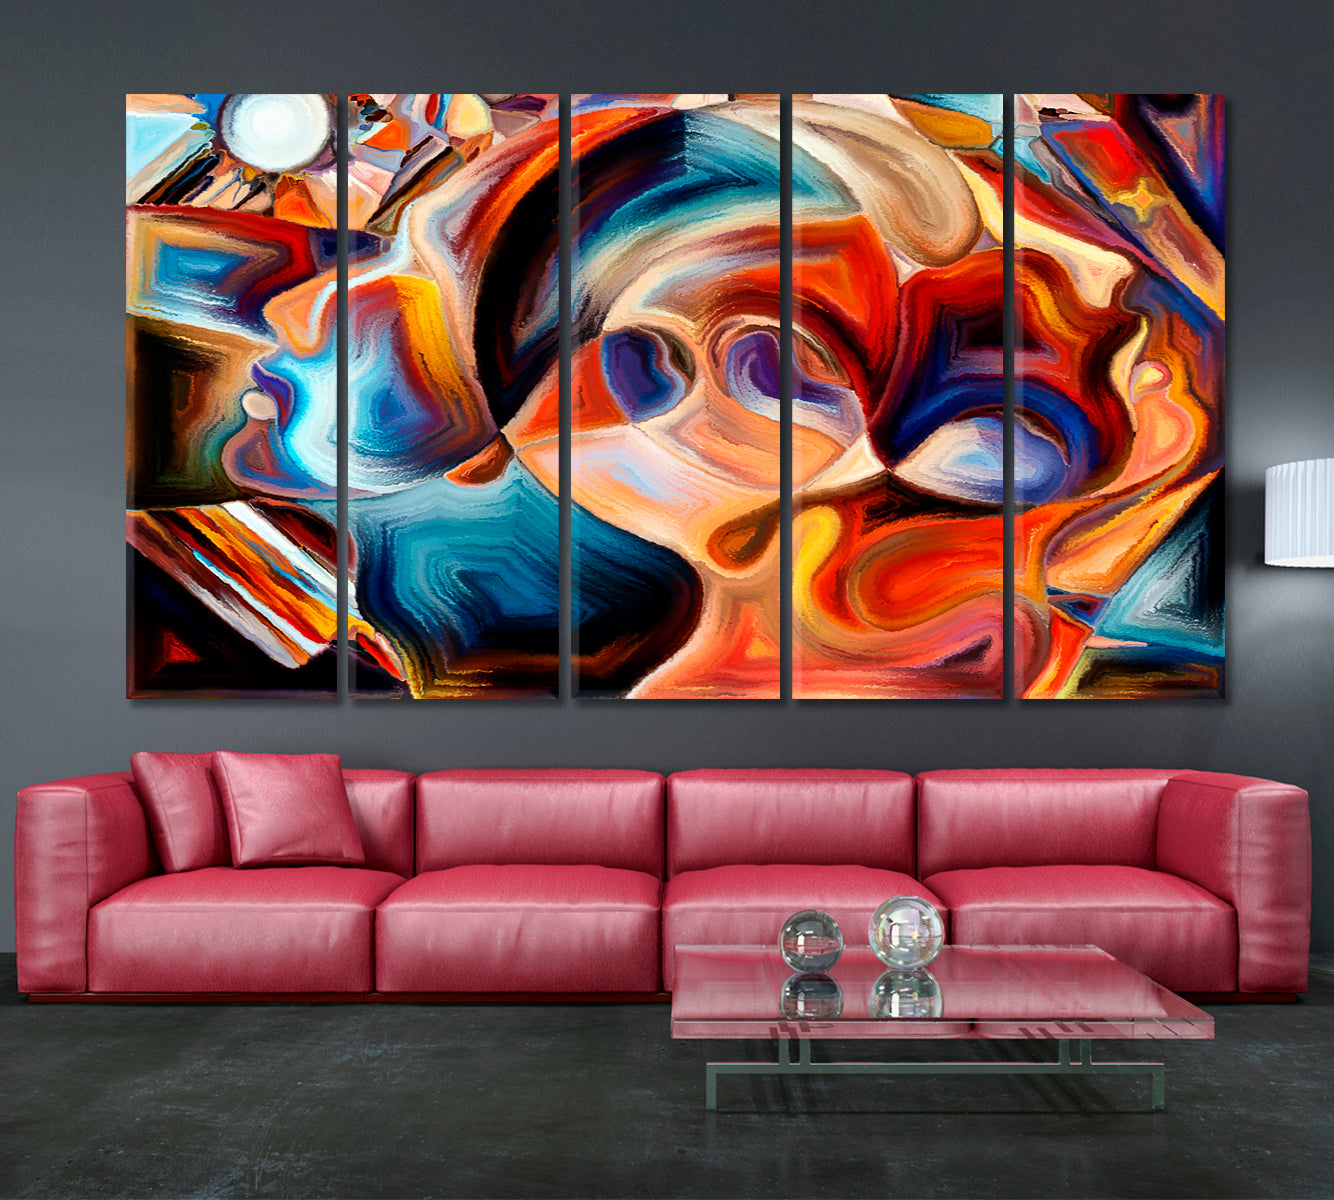 Lovers And Universe Abstract Art Print Artesty 5 panels 36" x 24" 